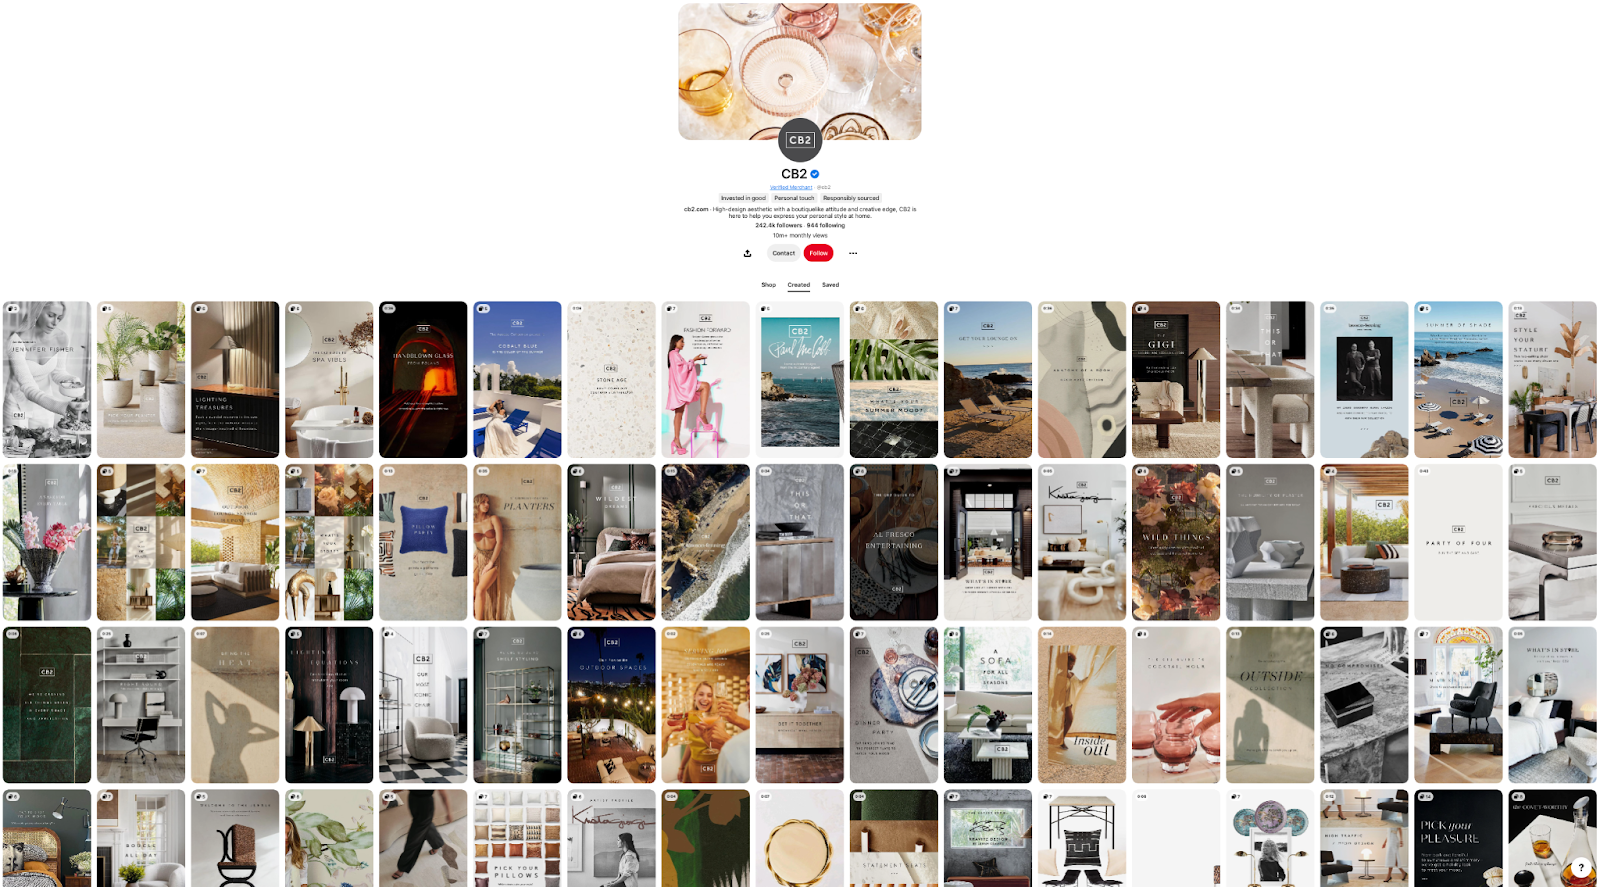 An example of a Pinterest board